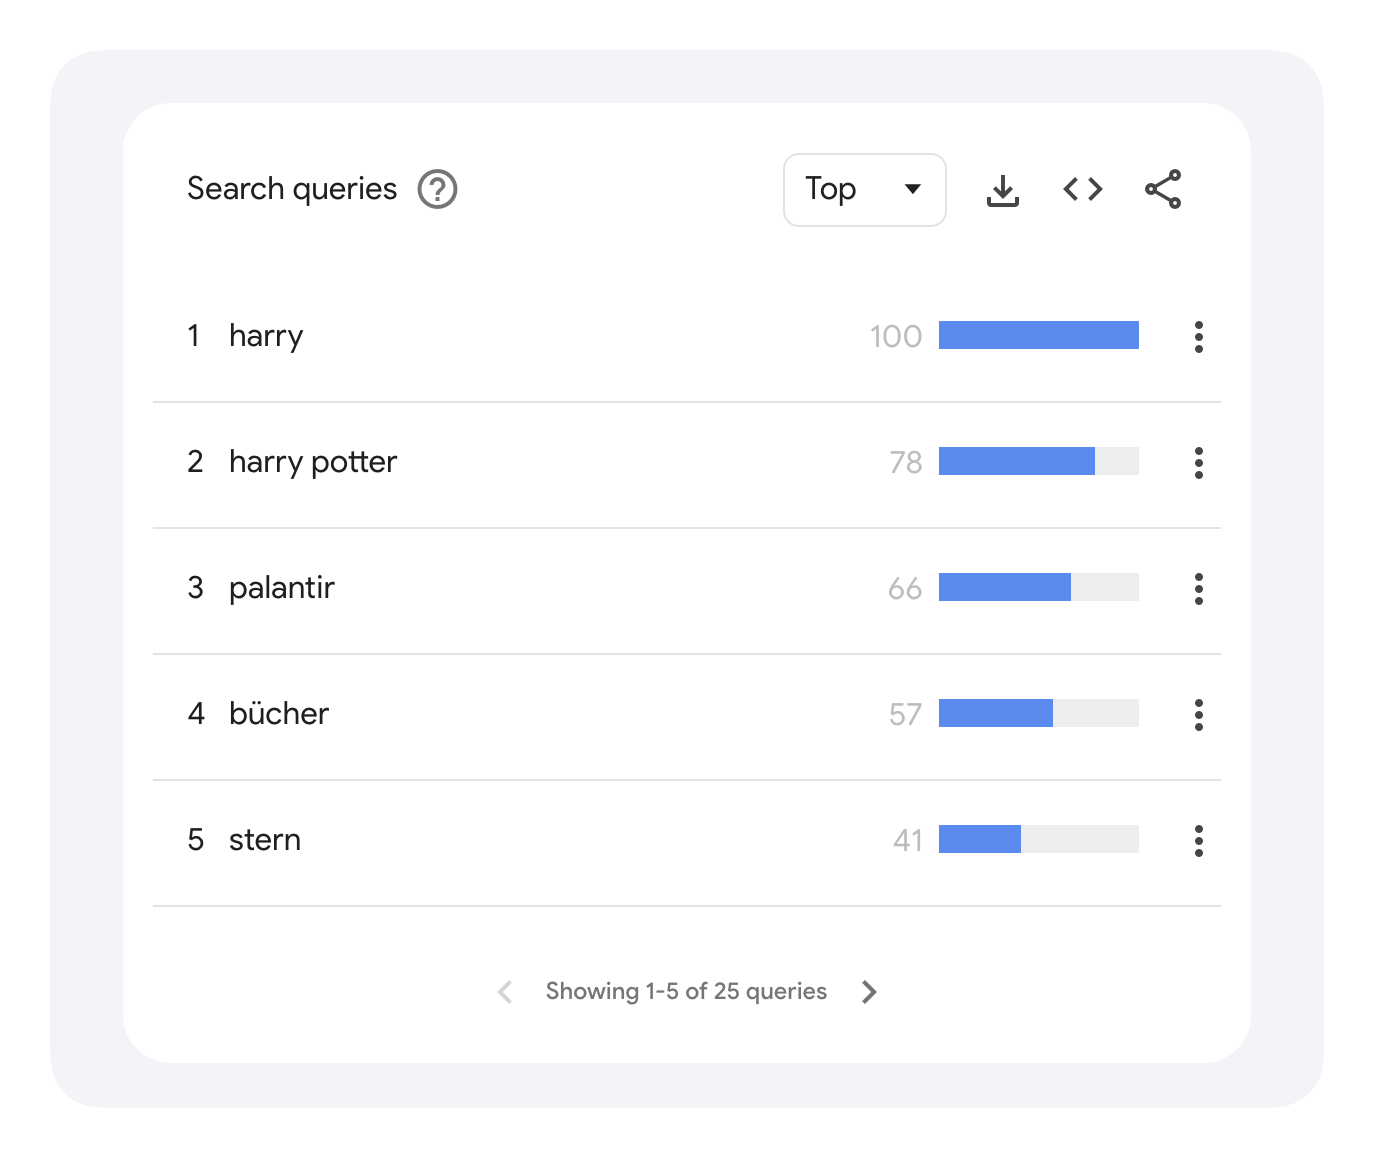 Related Queries - Top Search Queries Overall